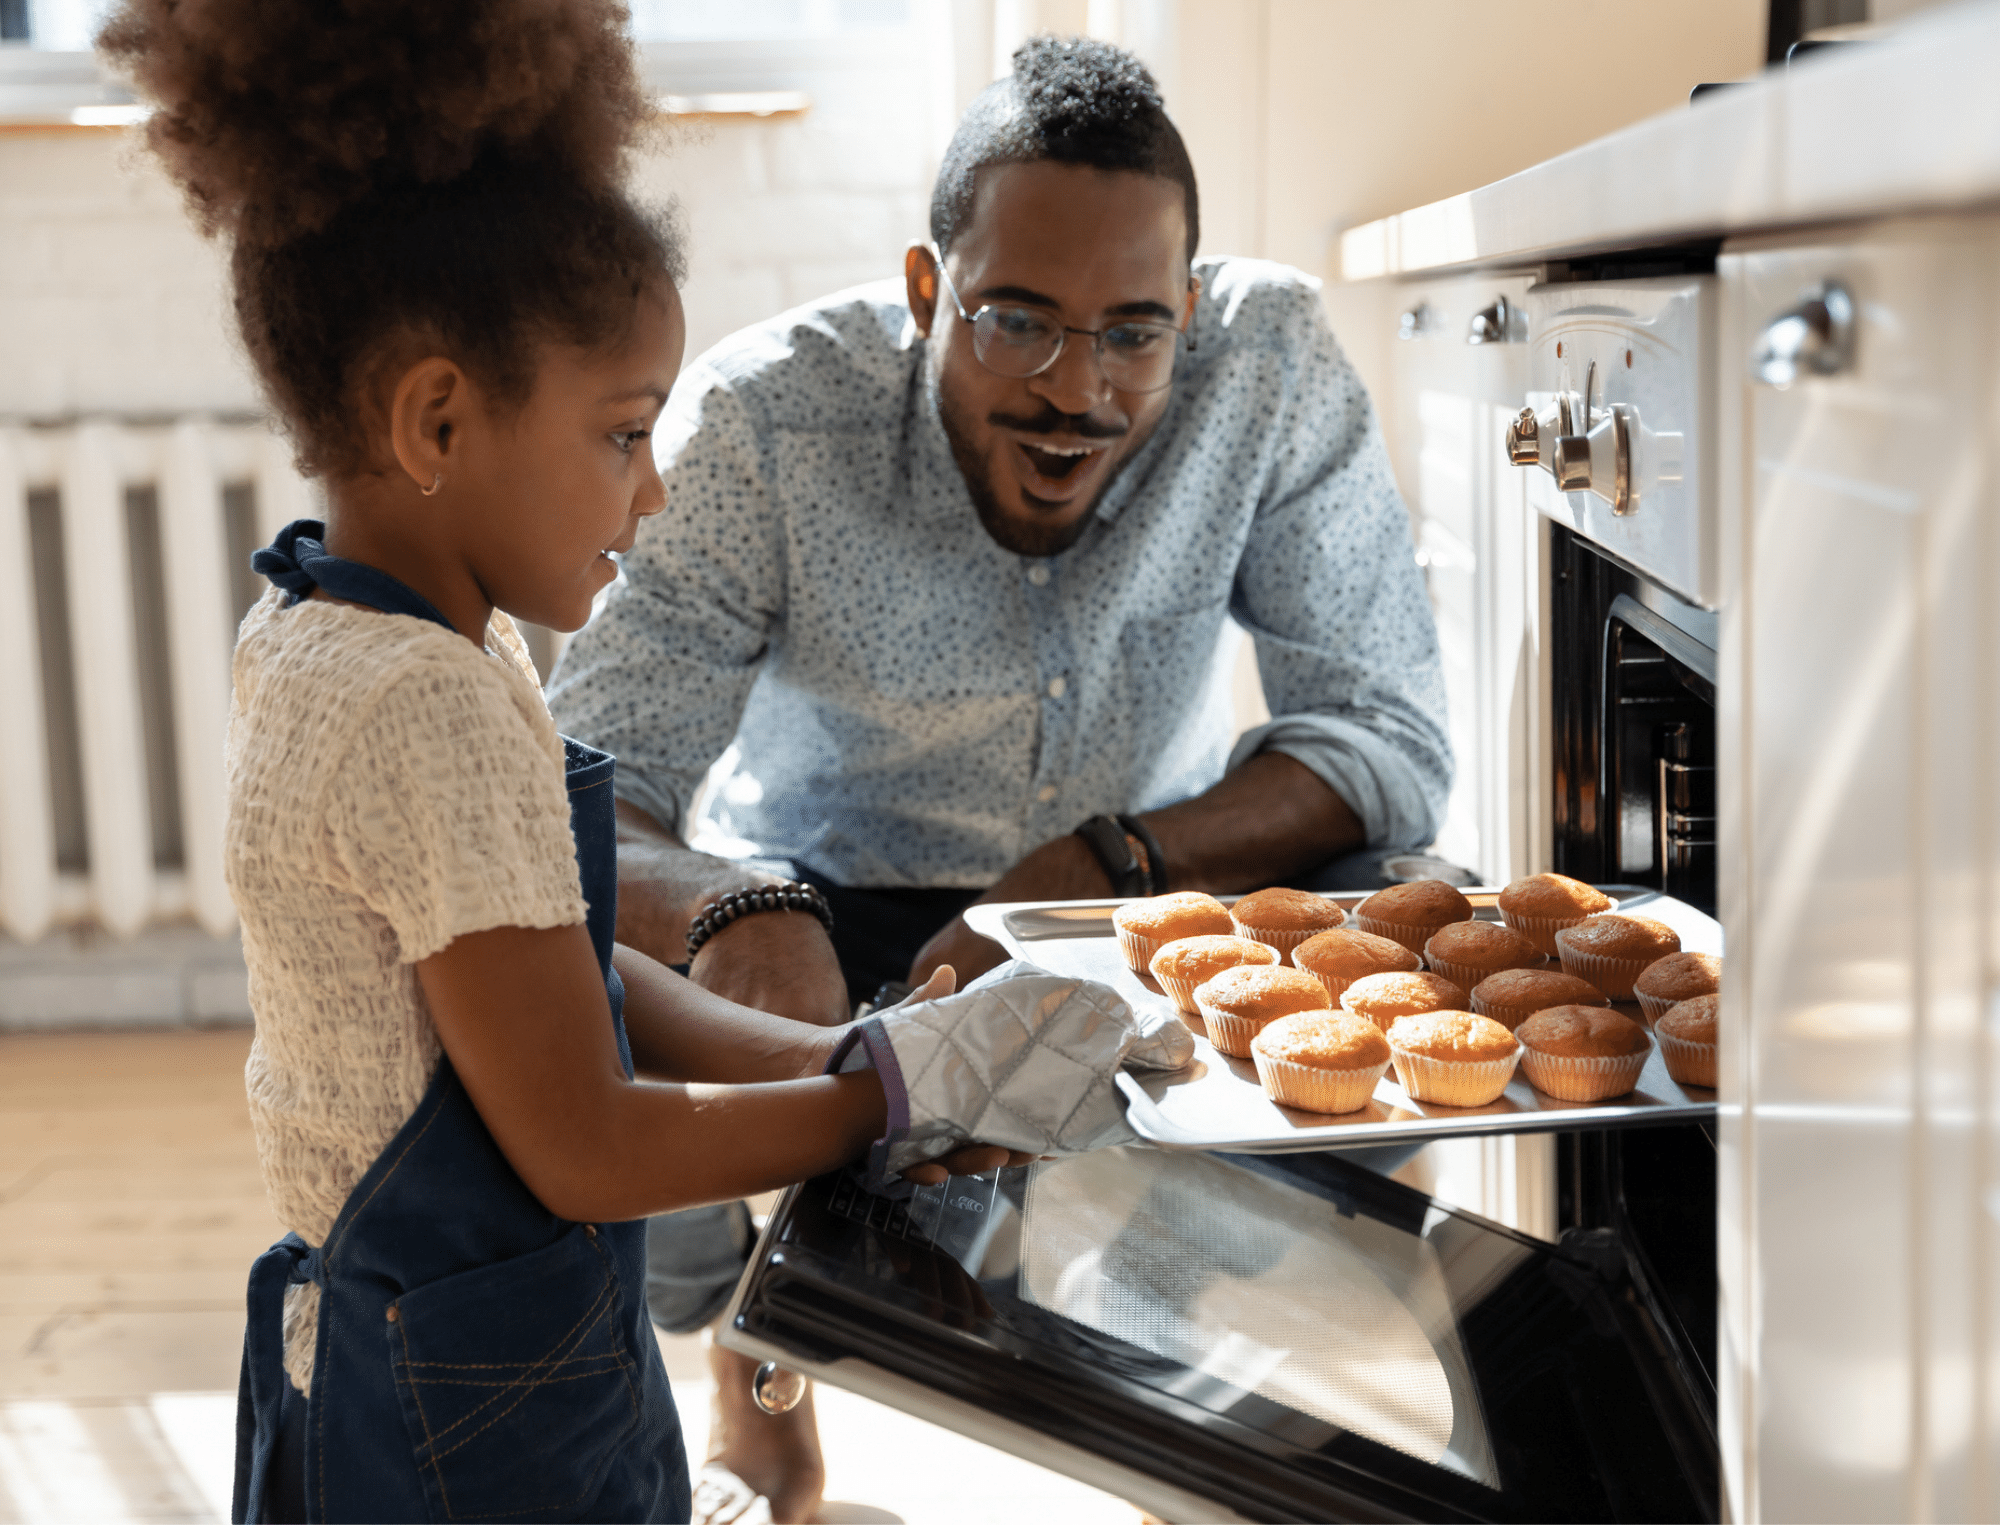 Young Black girl cooks with her father. Explore children's activities for Black History Month with Britt Hawthorne.